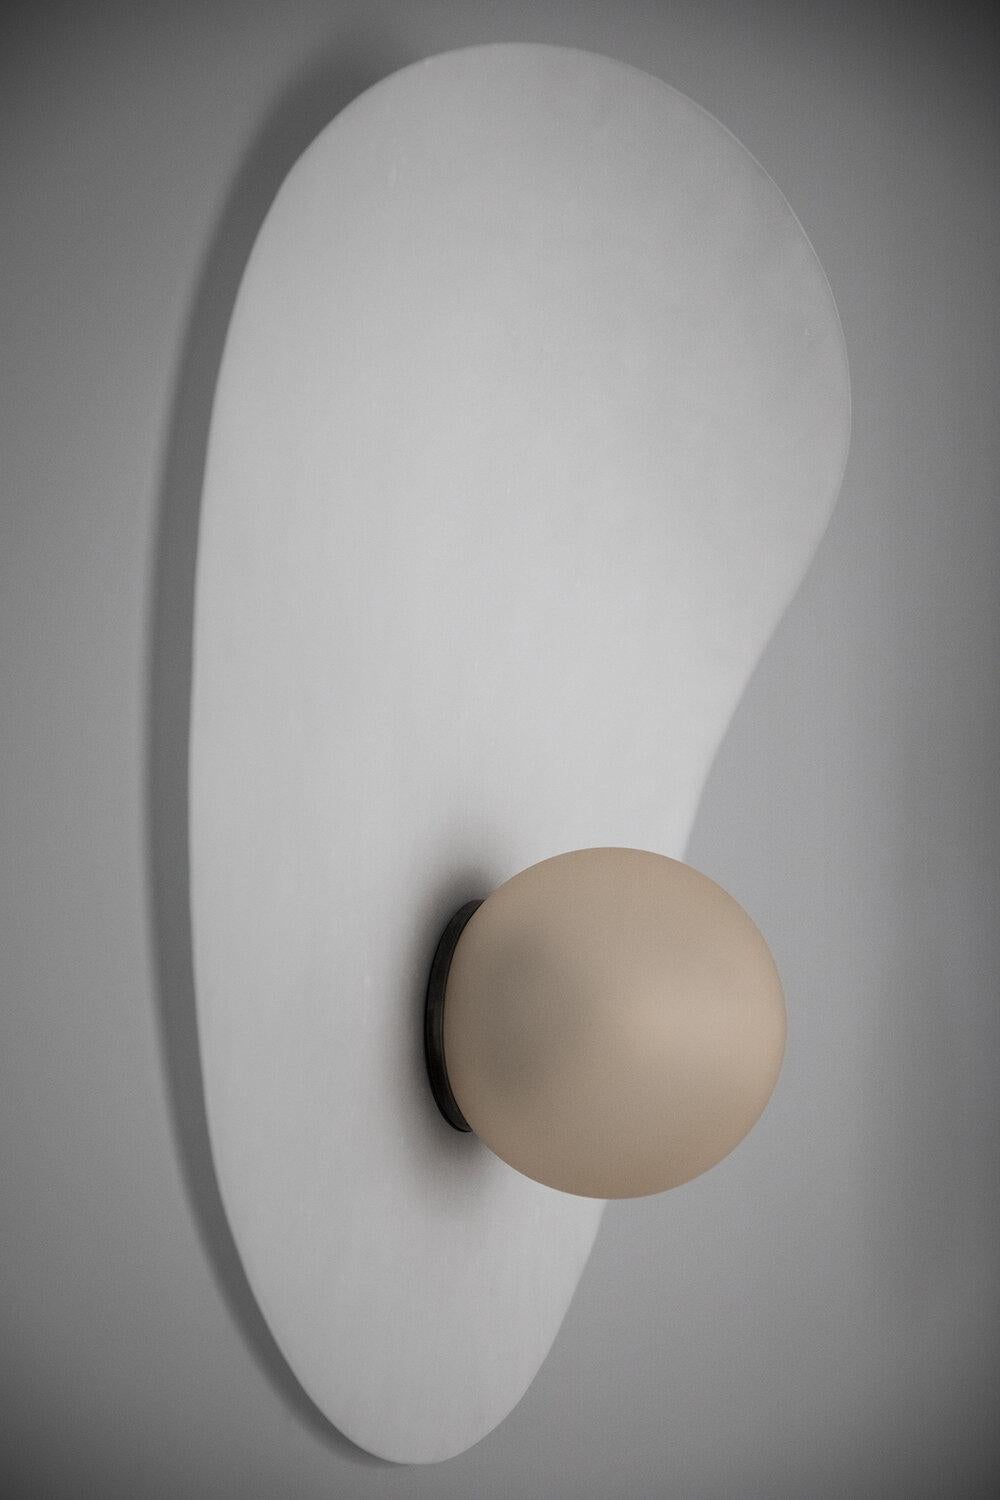 Myrna sconce light by Ladies & Gentlemen Studio
Dimensions: 23” x 18”, 6” globe
Materials: Powder-coated steel (also available in brass), fabric cord, color washed acid etched glass globe. 
Shade Options: Perforated Smoke, Perforated Fog,